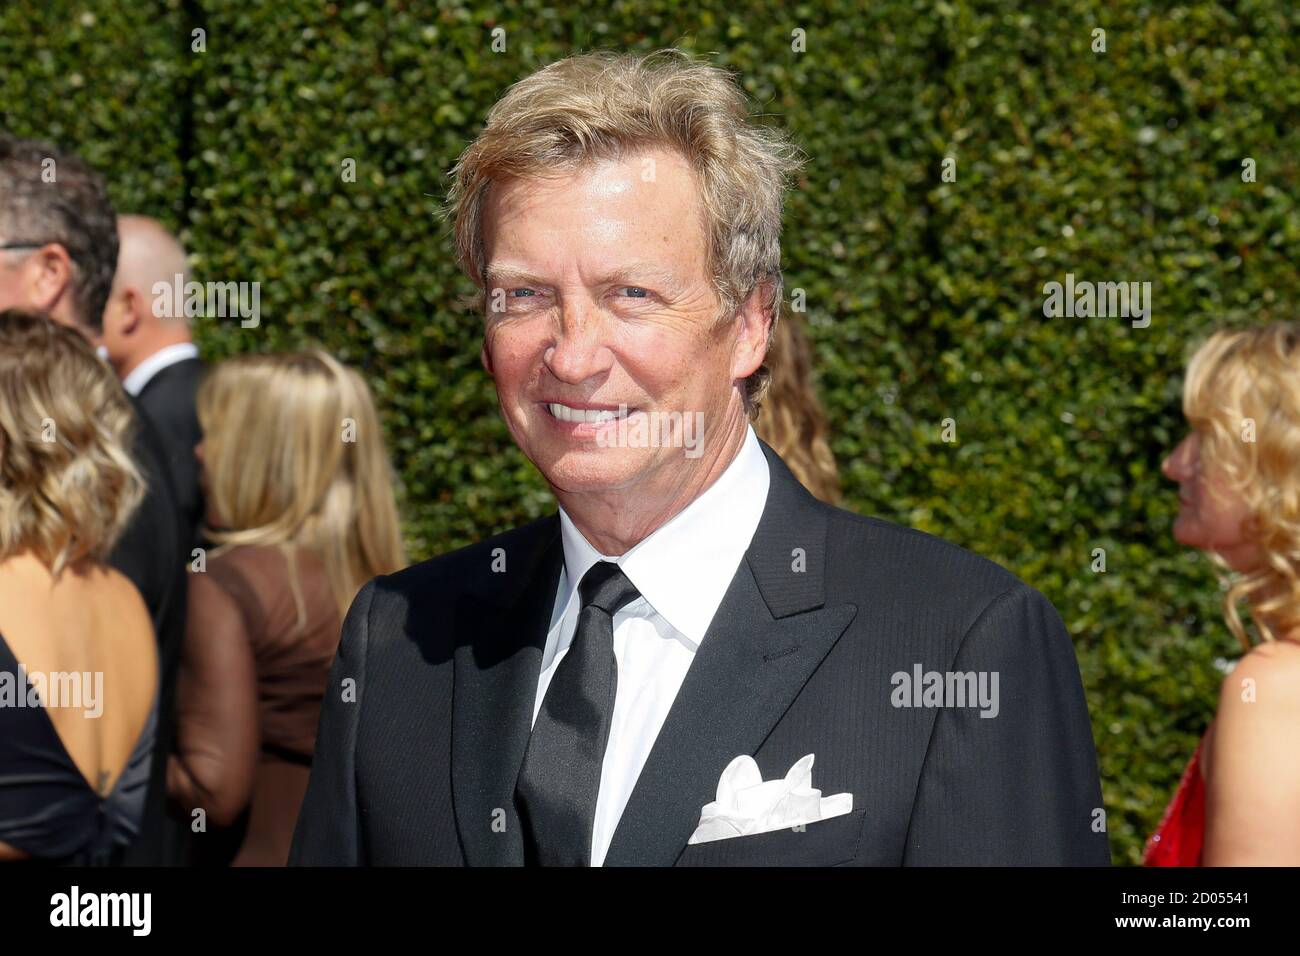 Producer Nigel Lythgoe poses at the 2014 Creative Arts Emmy Awards in Los Angeles, California August 16, 2014.  REUTERS/Danny Moloshok  (UNITED STATES-  Tags: ENTERTAINMENT) Stock Photo